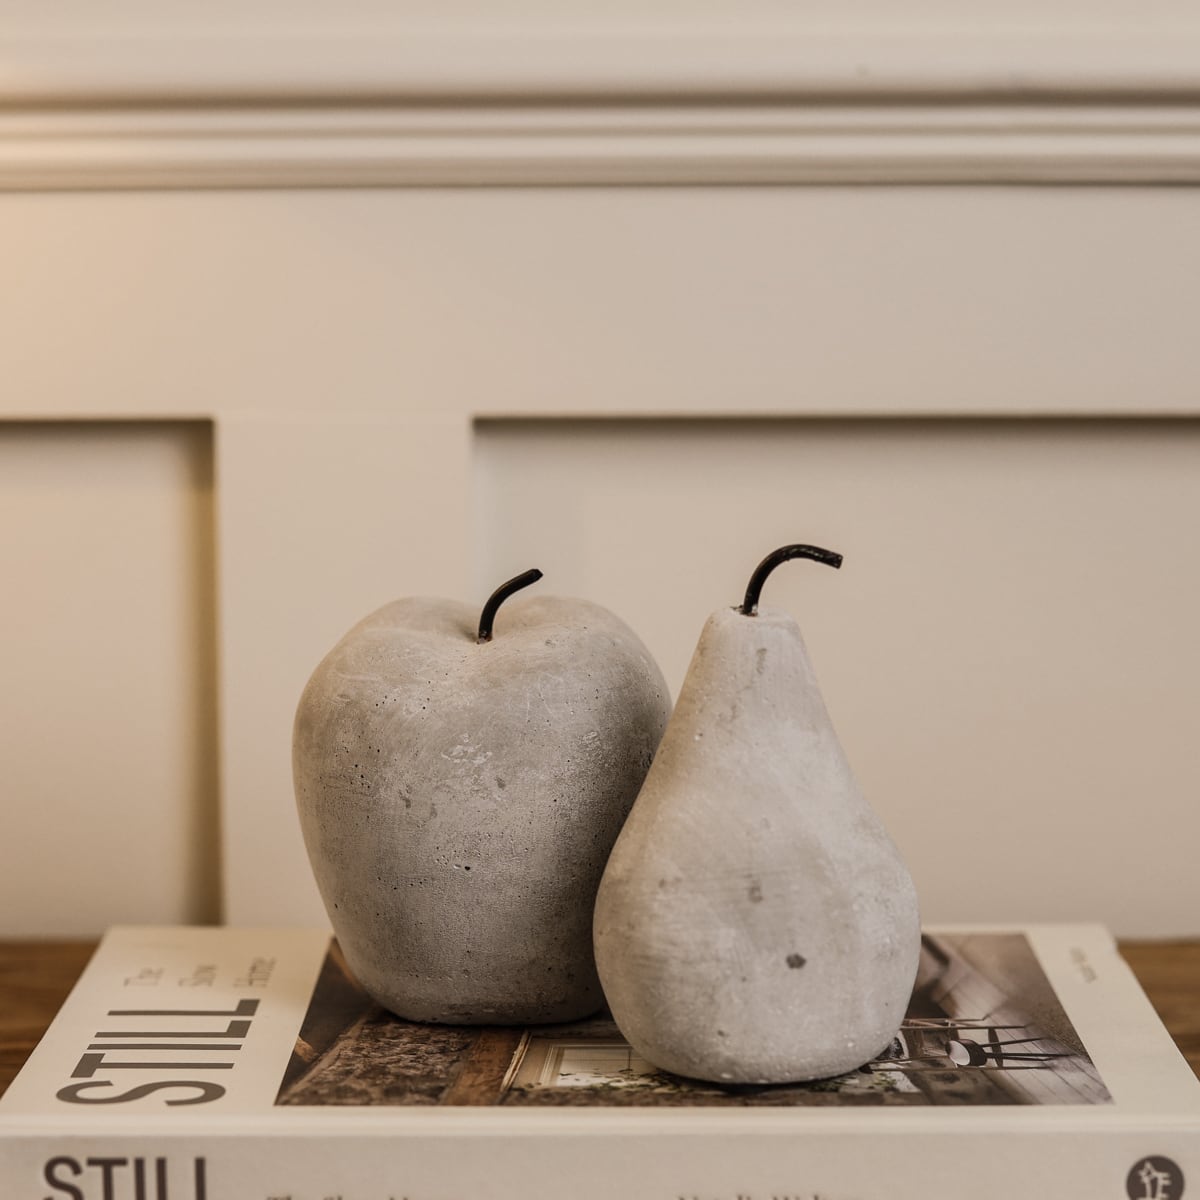 Cement grey washed apple and pear ornaments layered on white decorative book on wooden console.